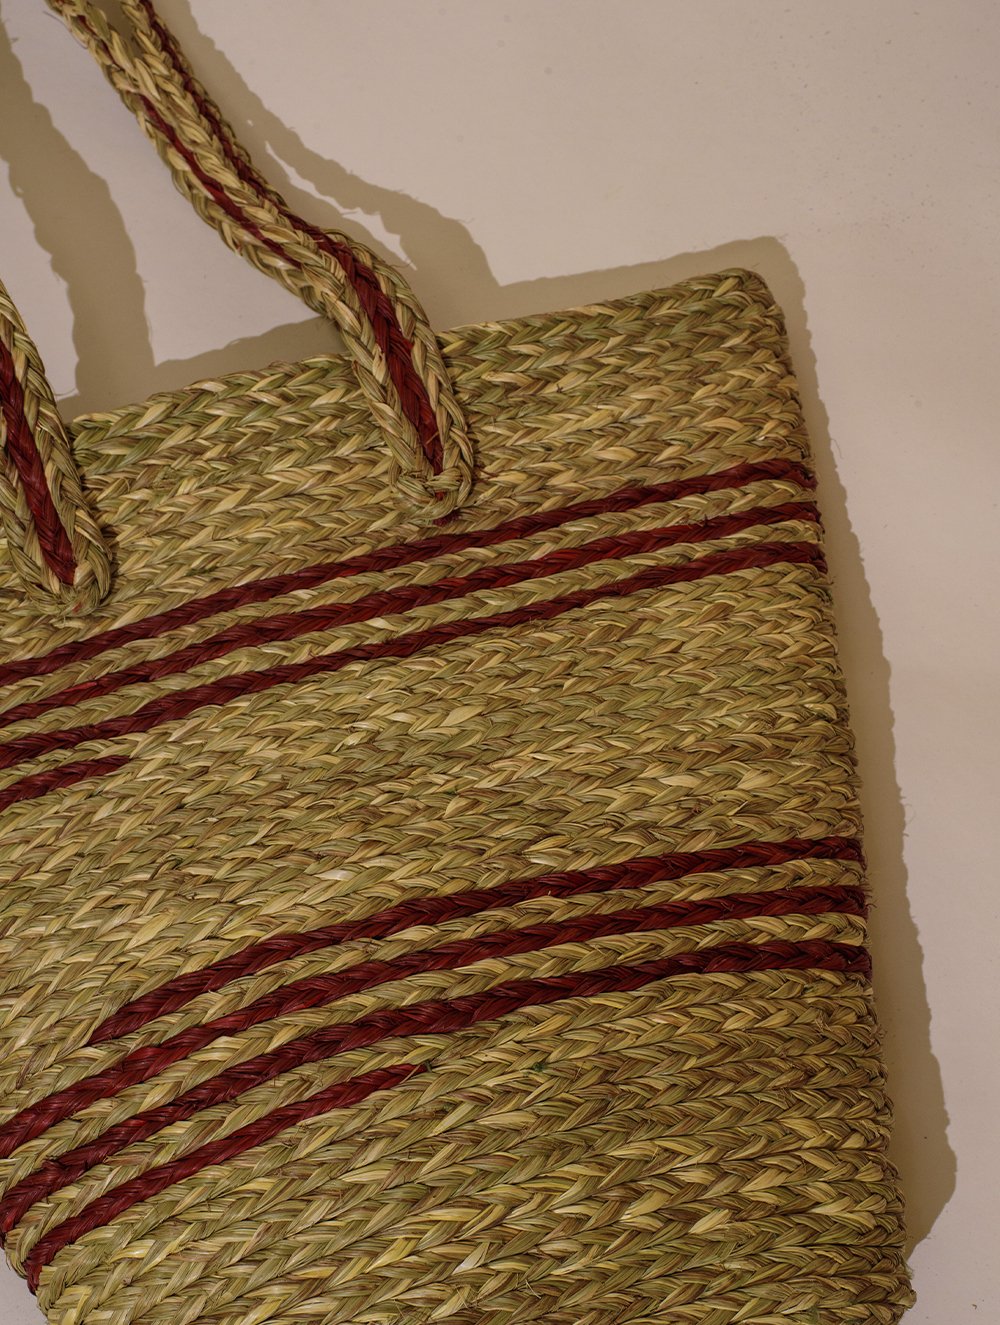 Load image into Gallery viewer, Handcrafted Sabai Grass Tote / Utility Bag - Red &amp; Beige